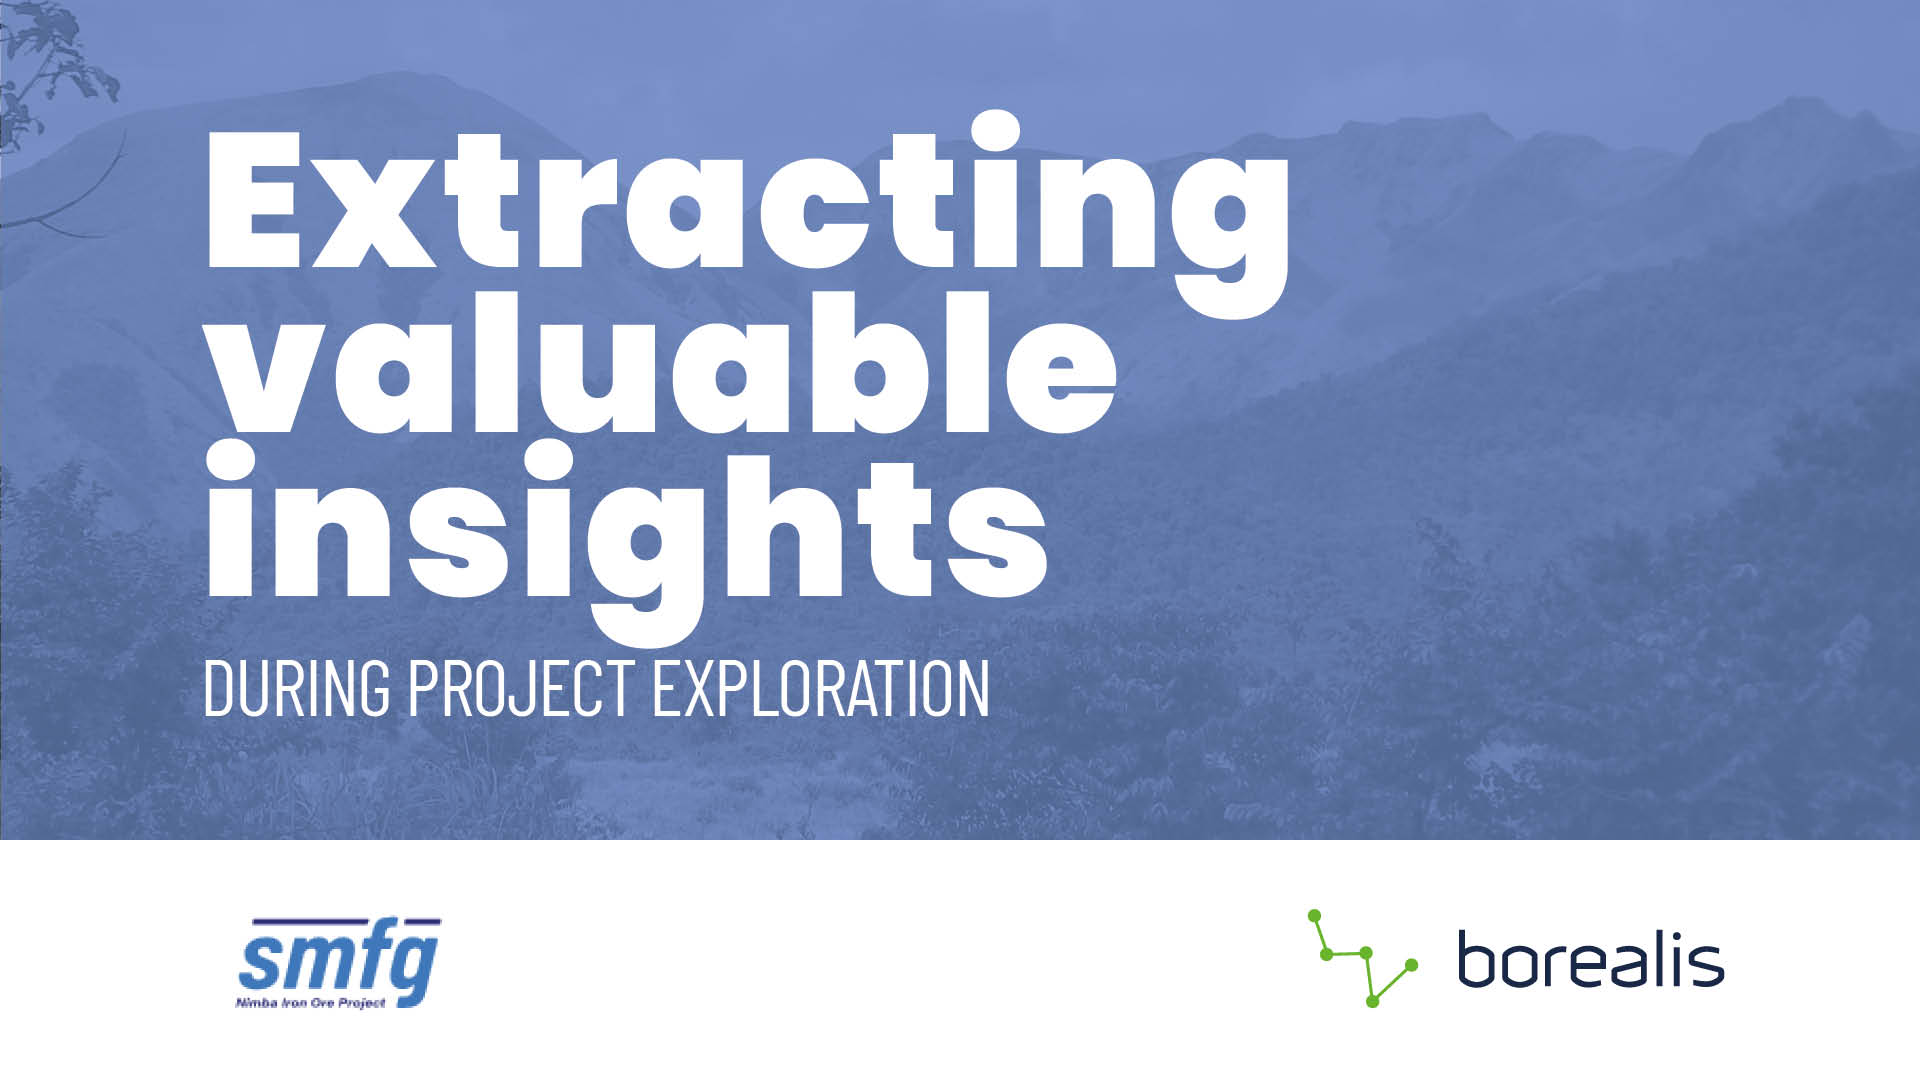 Extracting valuable insights during project exploration